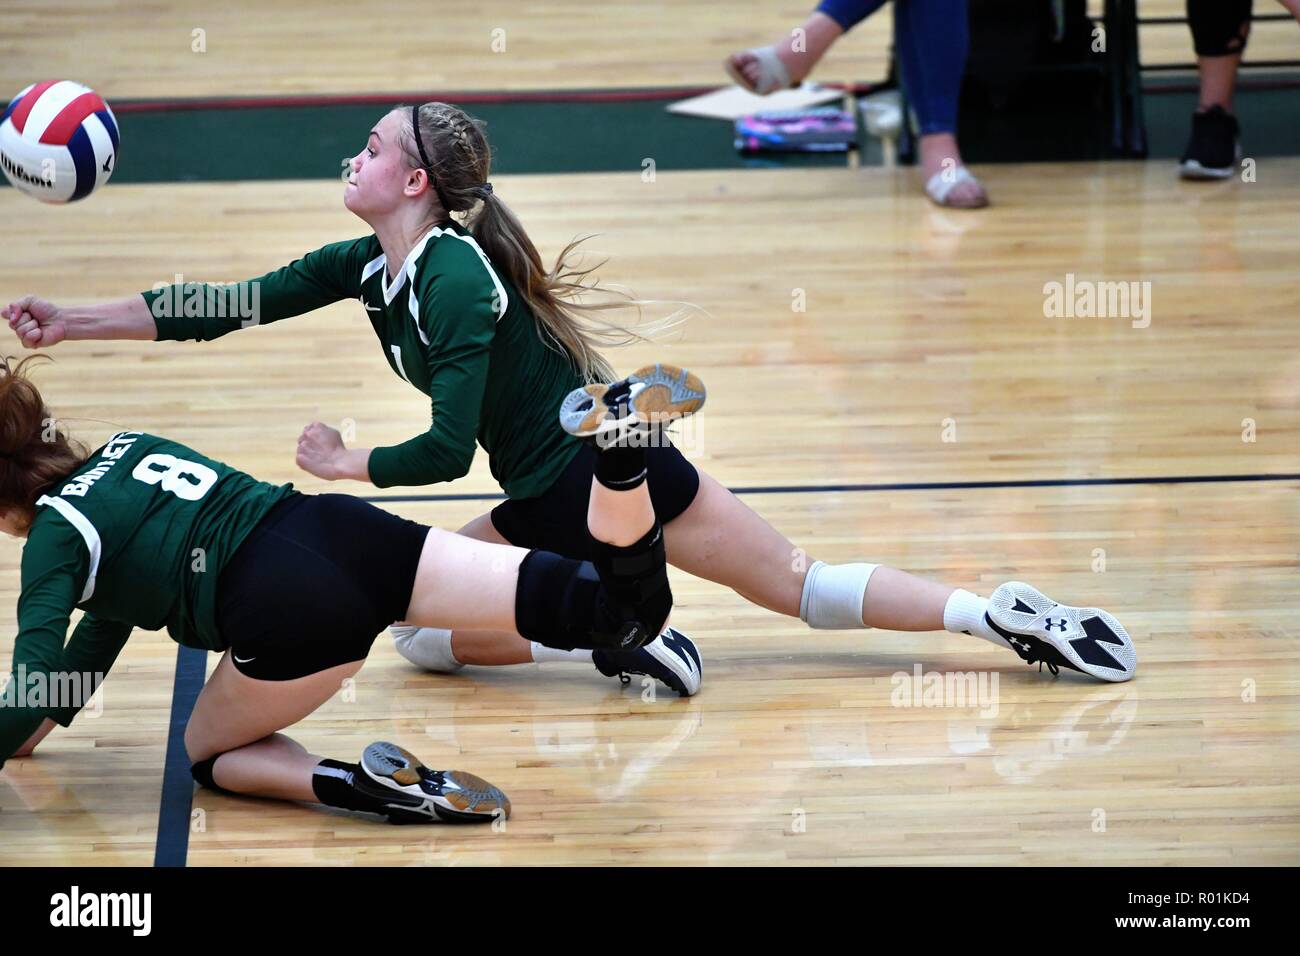 Player making a diving dig for an opponent's shot. USA. Stock Photo